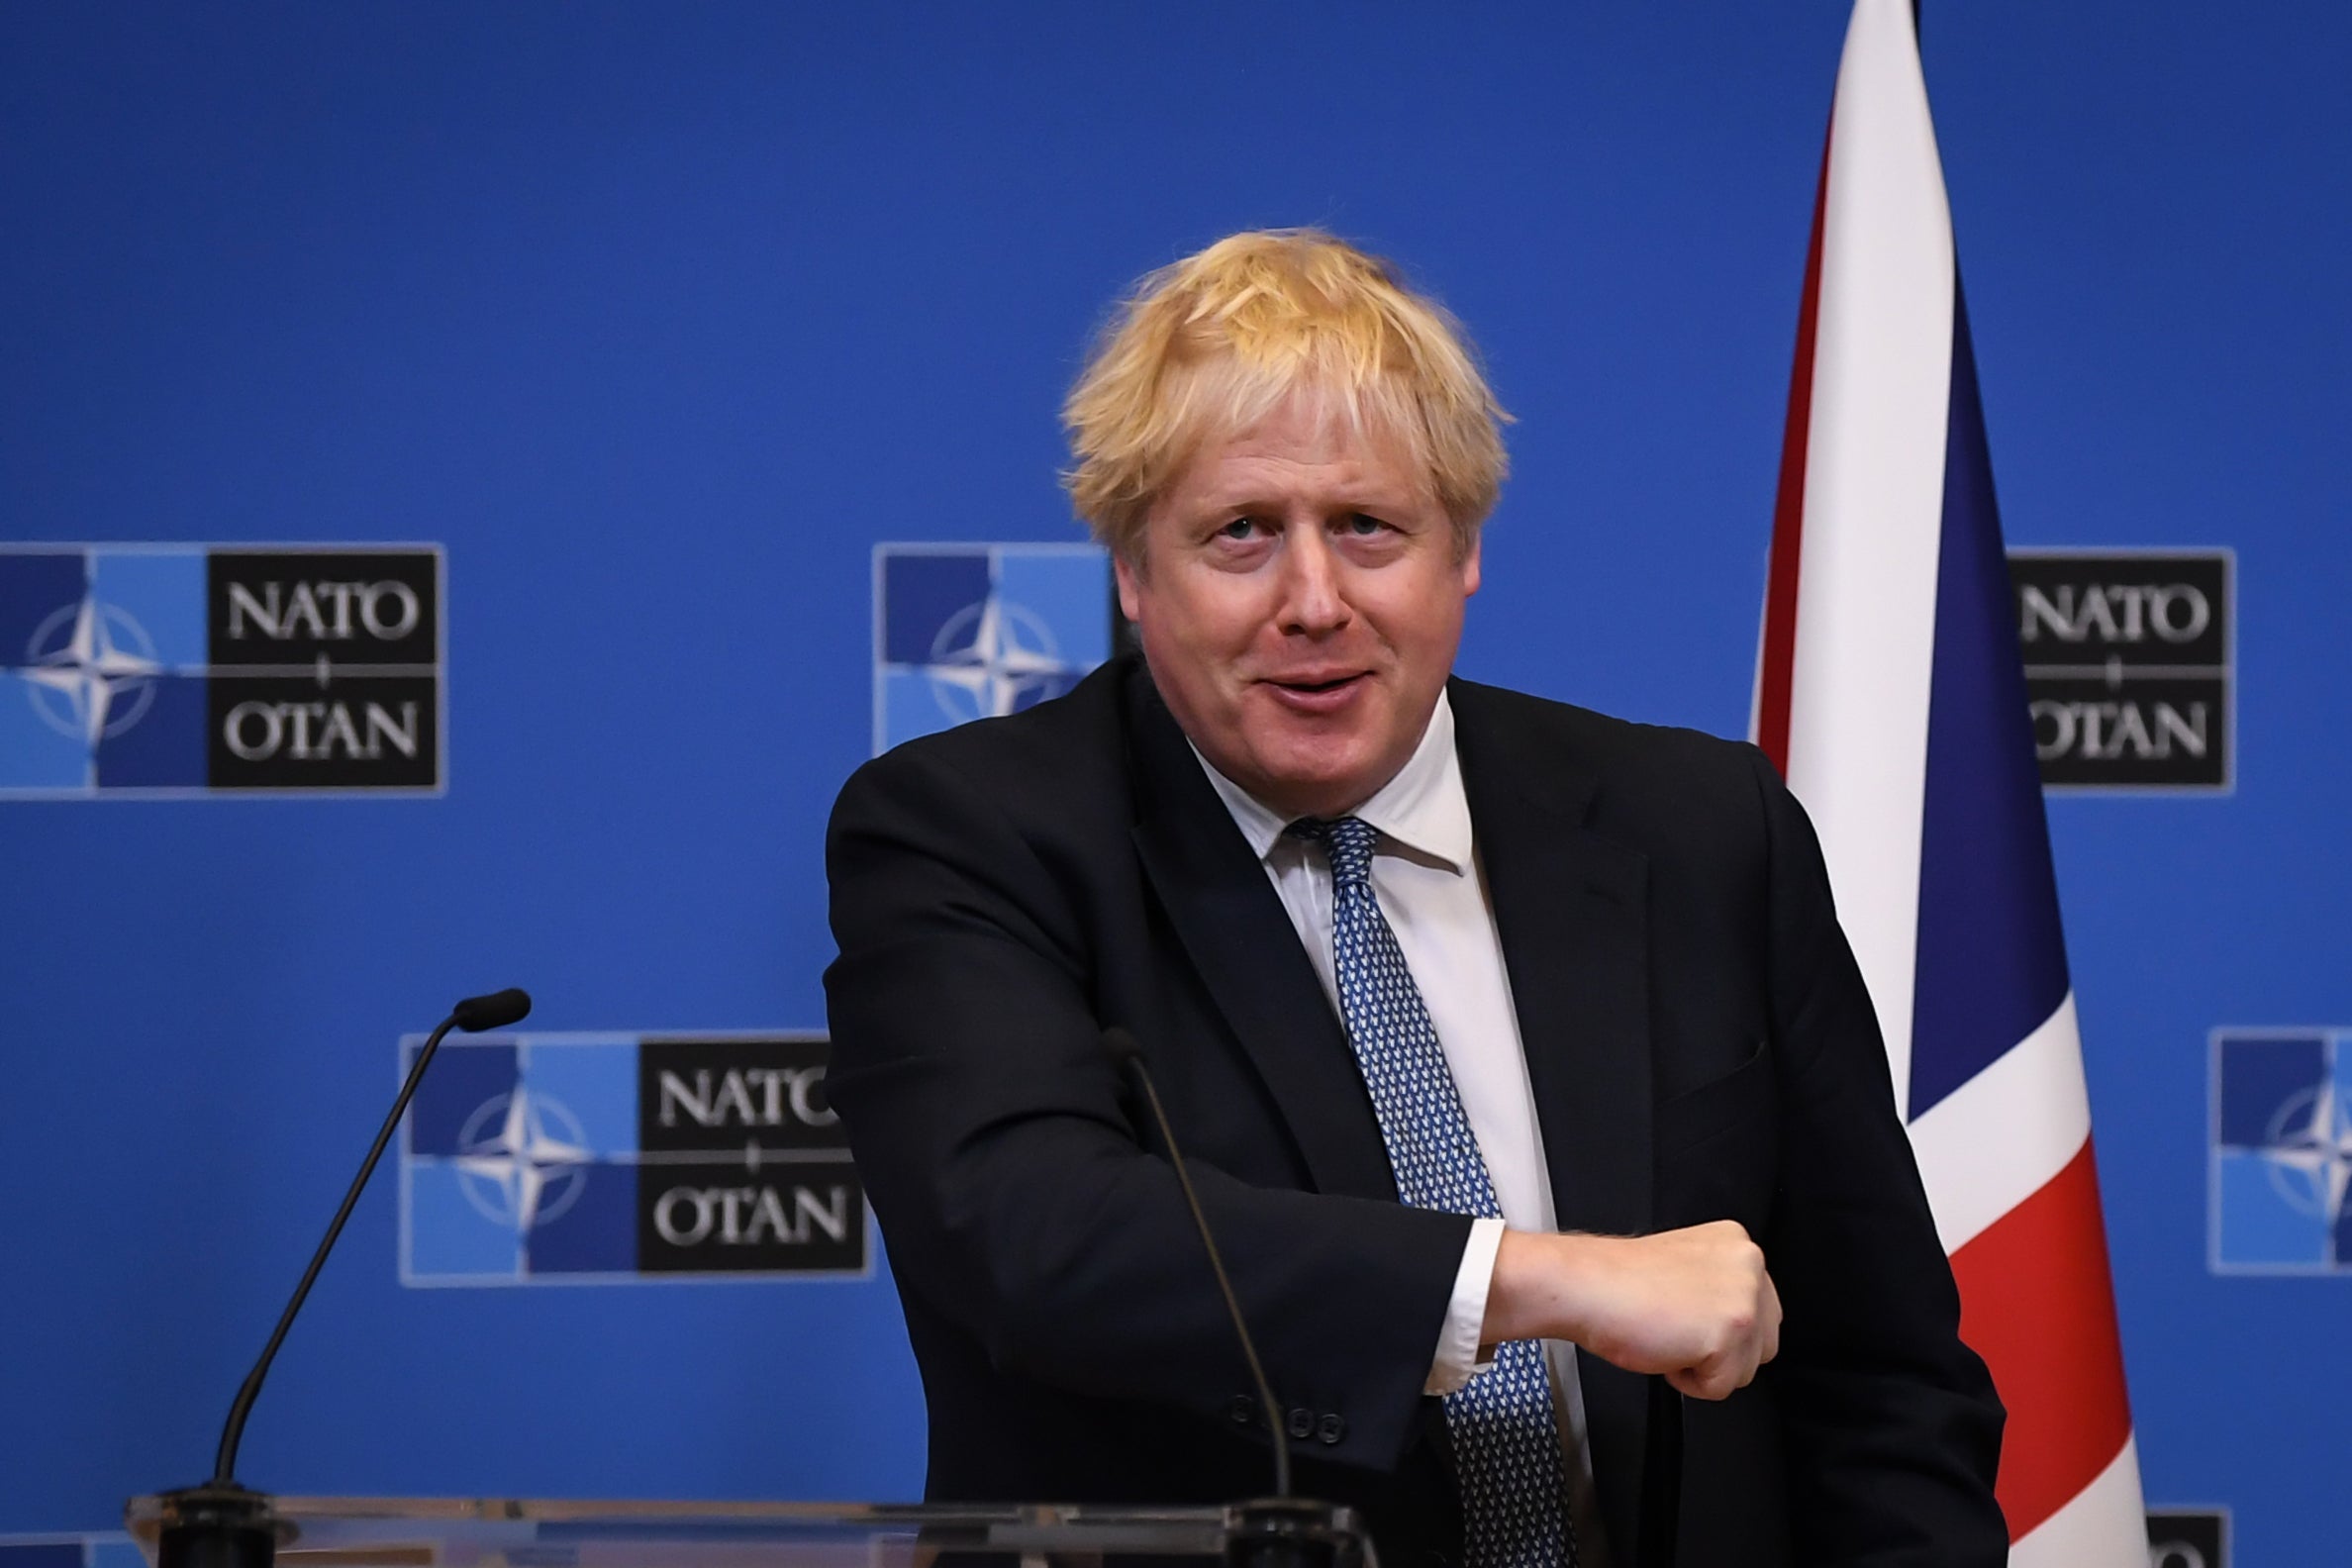 Boris Johnson during a visit to Nato headquarters in Brussels (Daniel Leal/PA)